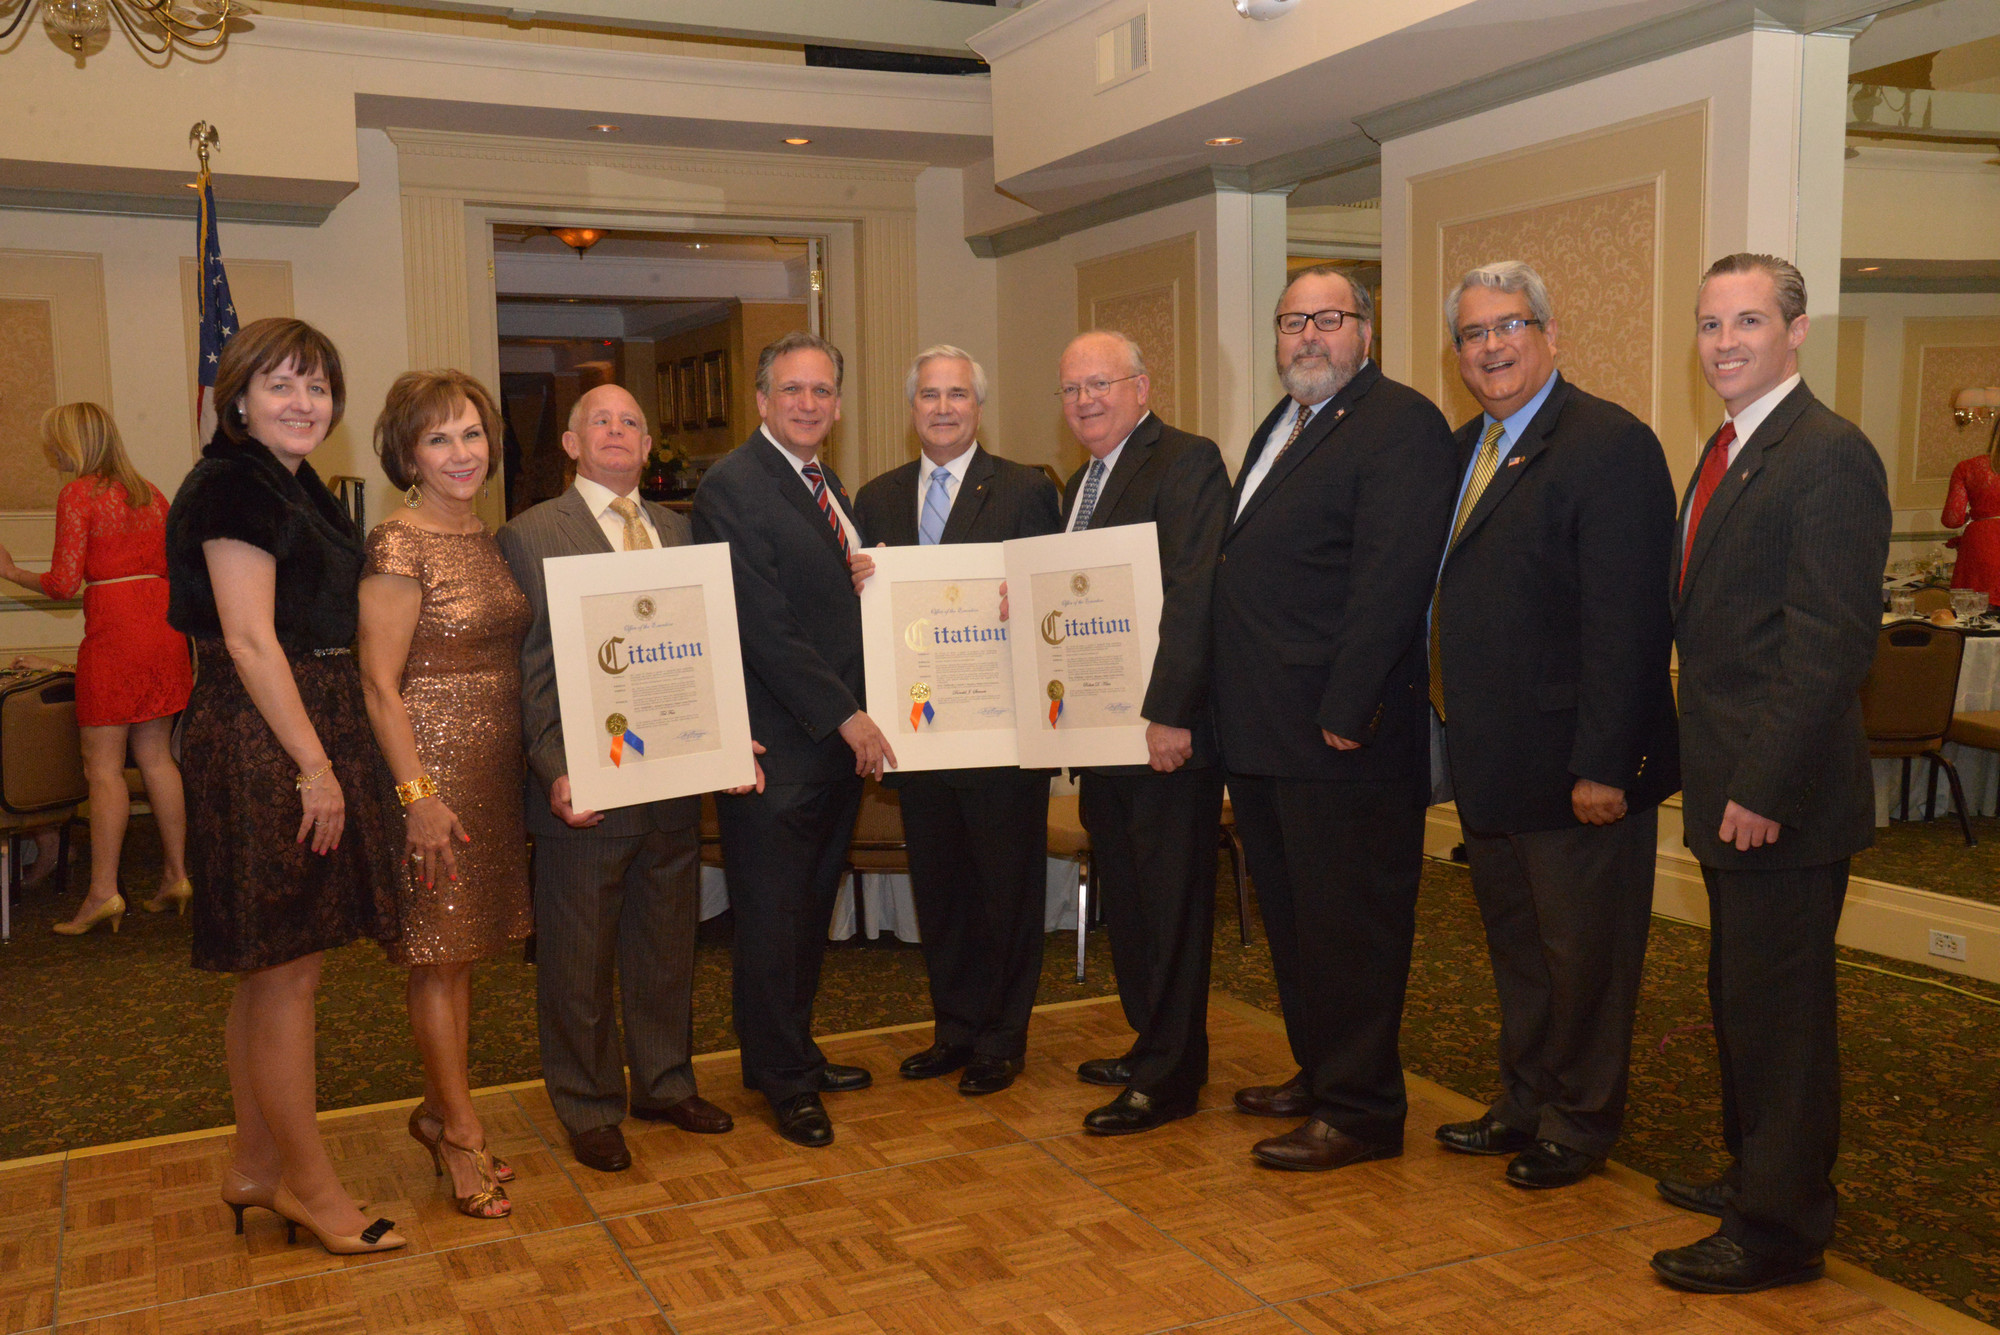 Organizer Jeanne Mulry, left, organizer Joan MacNaughton, honoree Tedd Fass, Nassau County Executive Ed Mangano, honoree Don Steinert, honoree Robert Klein, Rockville Centre Mayor Francis Murray, Town of Hempstead Councilman Anthony Santino and Village Trustee Kevin Glynn all attended the evening.